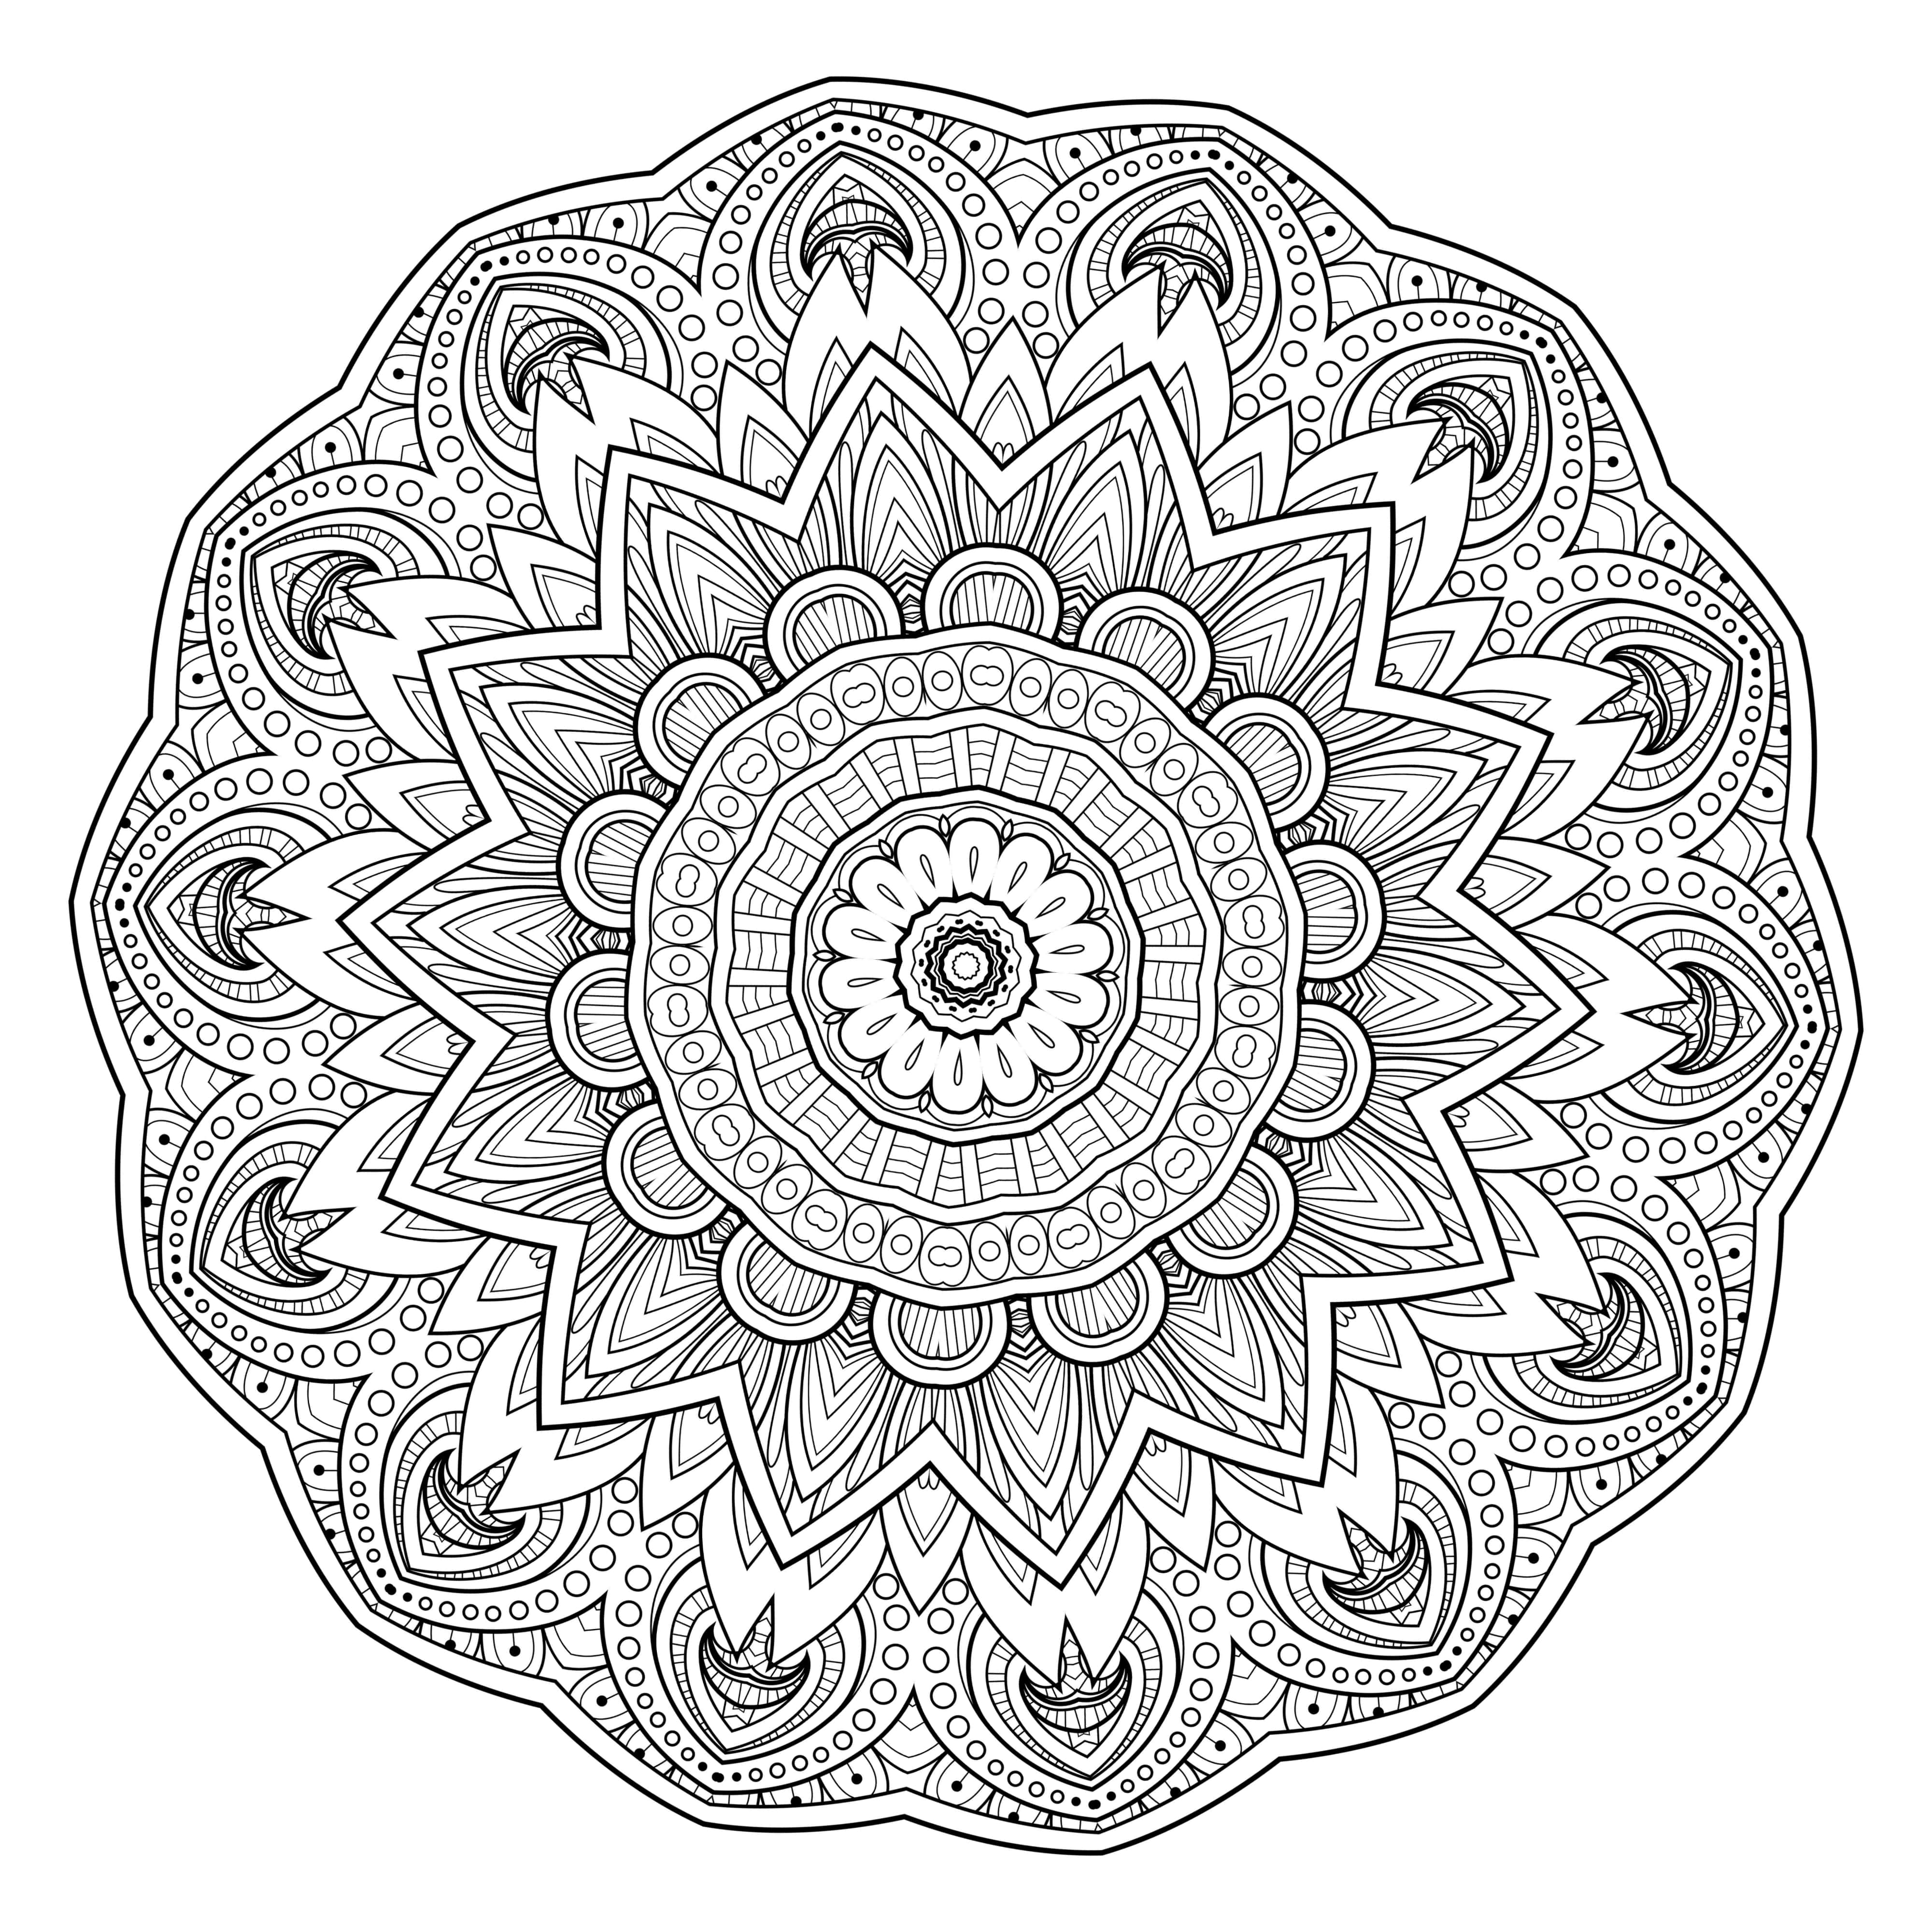 Mandala Flower Coloring Pages Difficult at GetColorings.com | Free